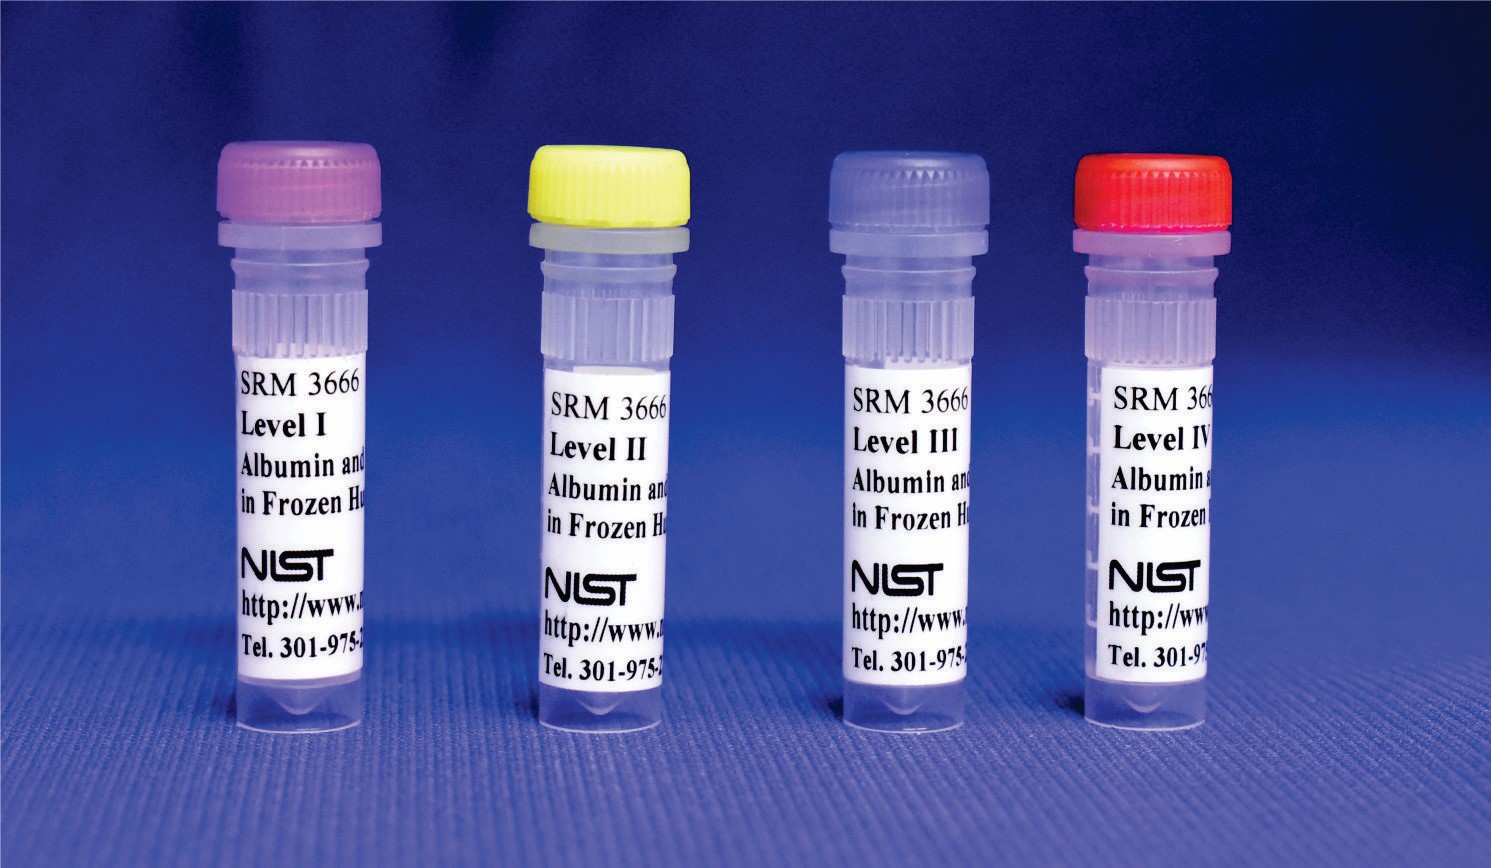 Four plastic vials with different colored lids are displayed standing up, with labels that say SRM 3666 and NIST. 